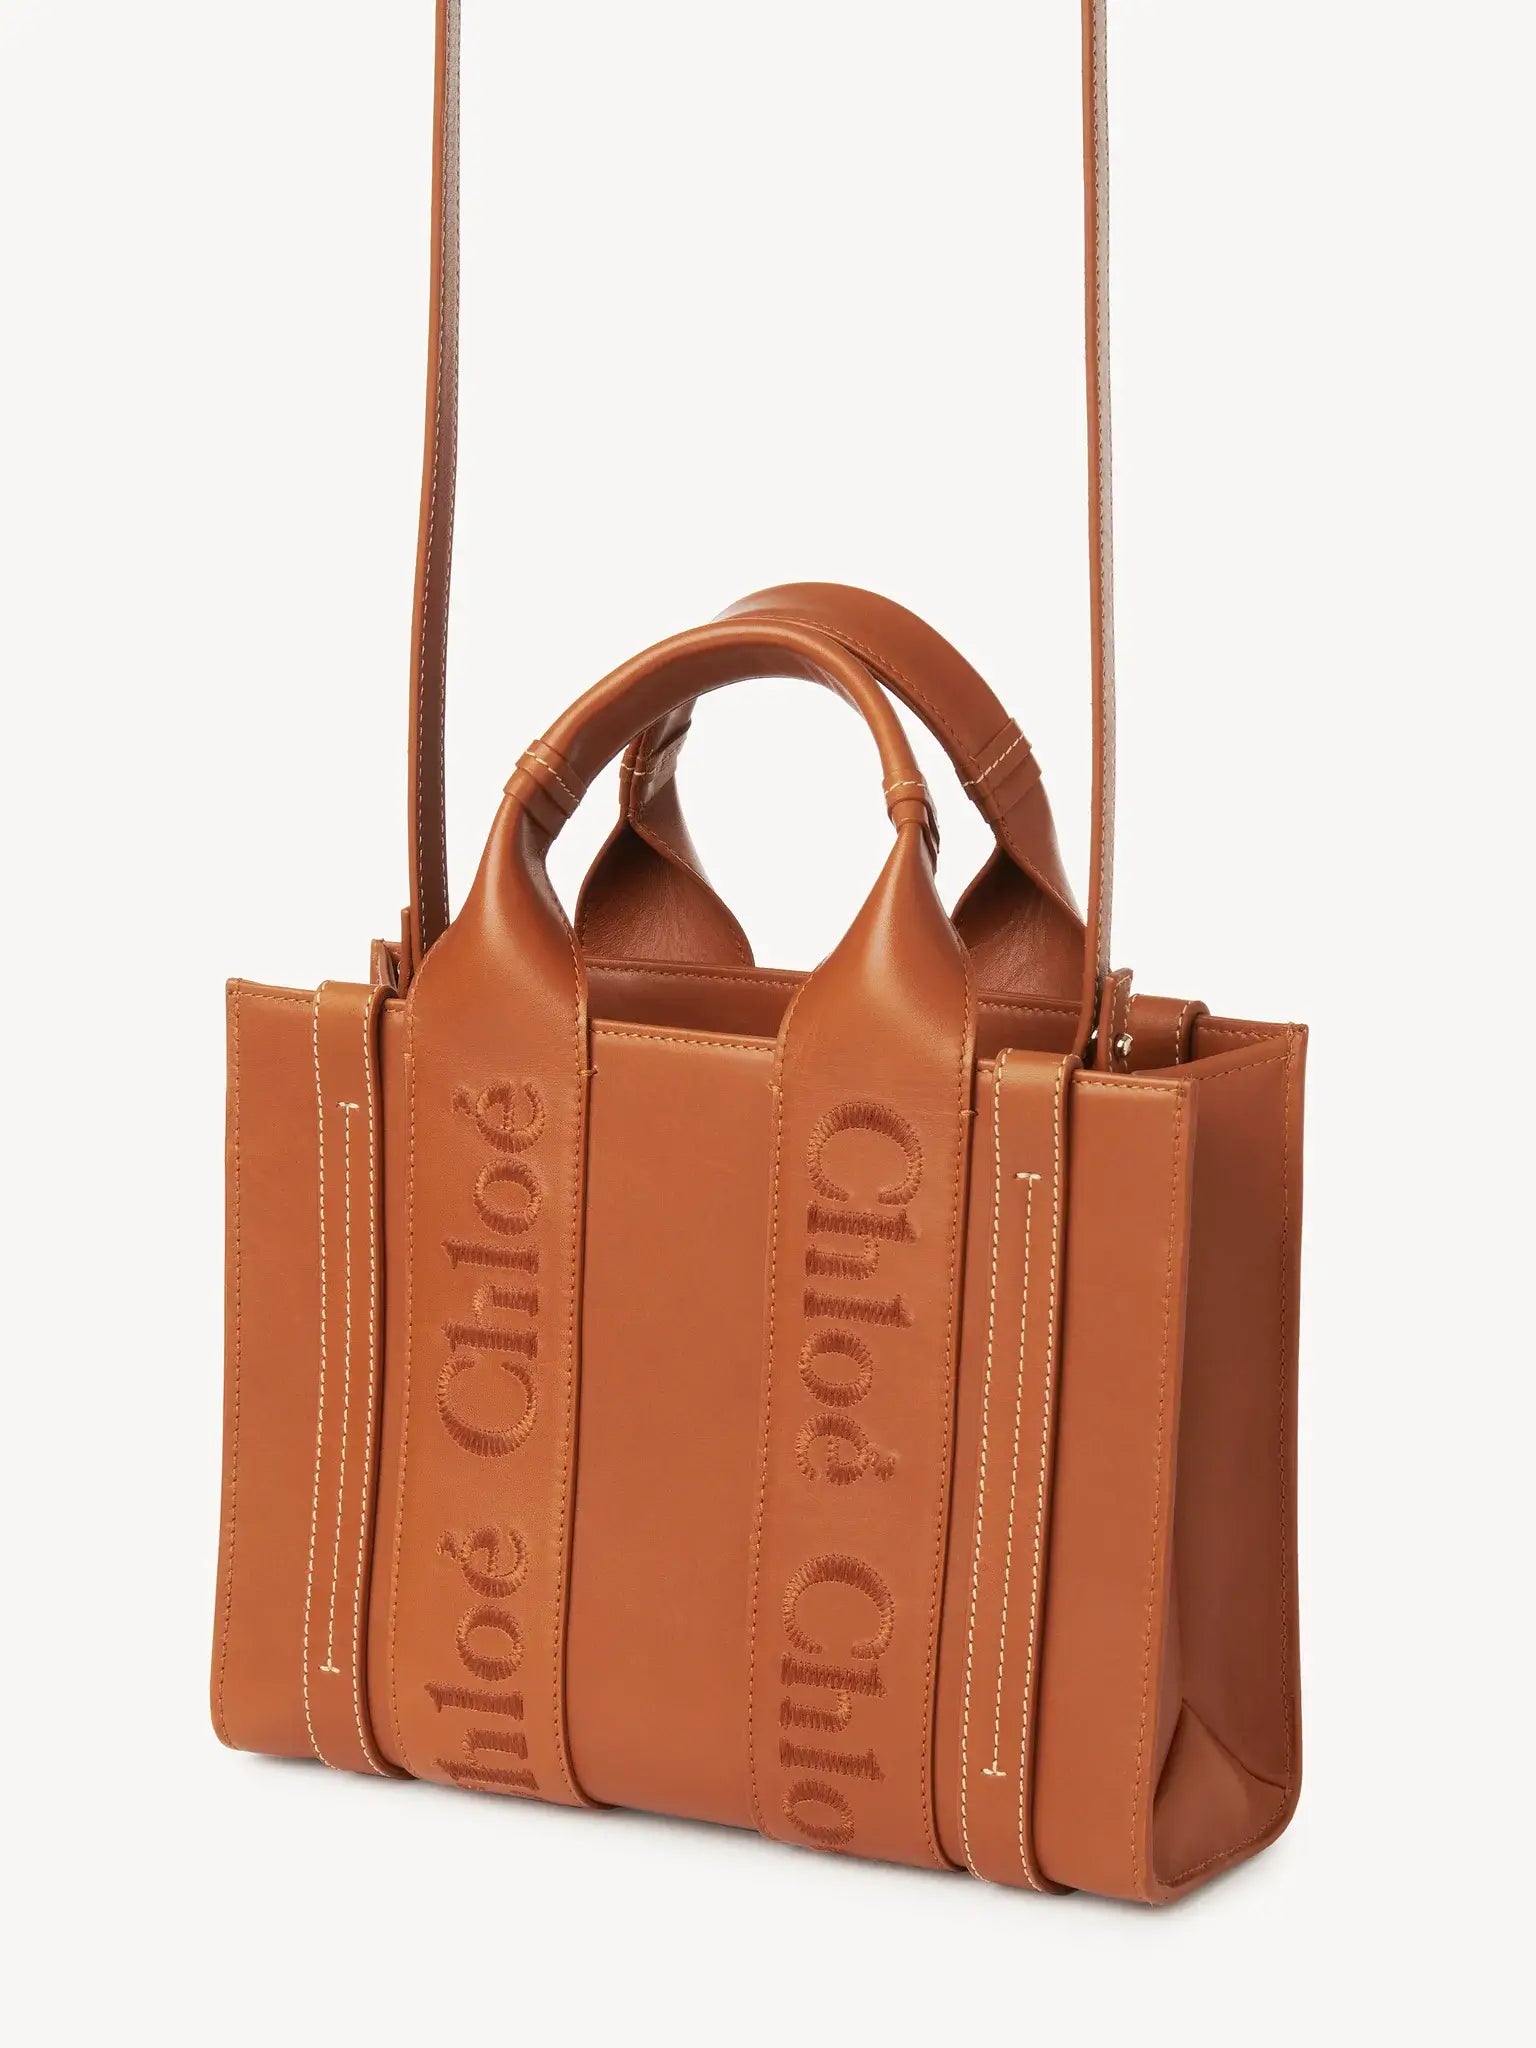 Chloe Small Woody Tote with Strap in Caramel from The New Trend